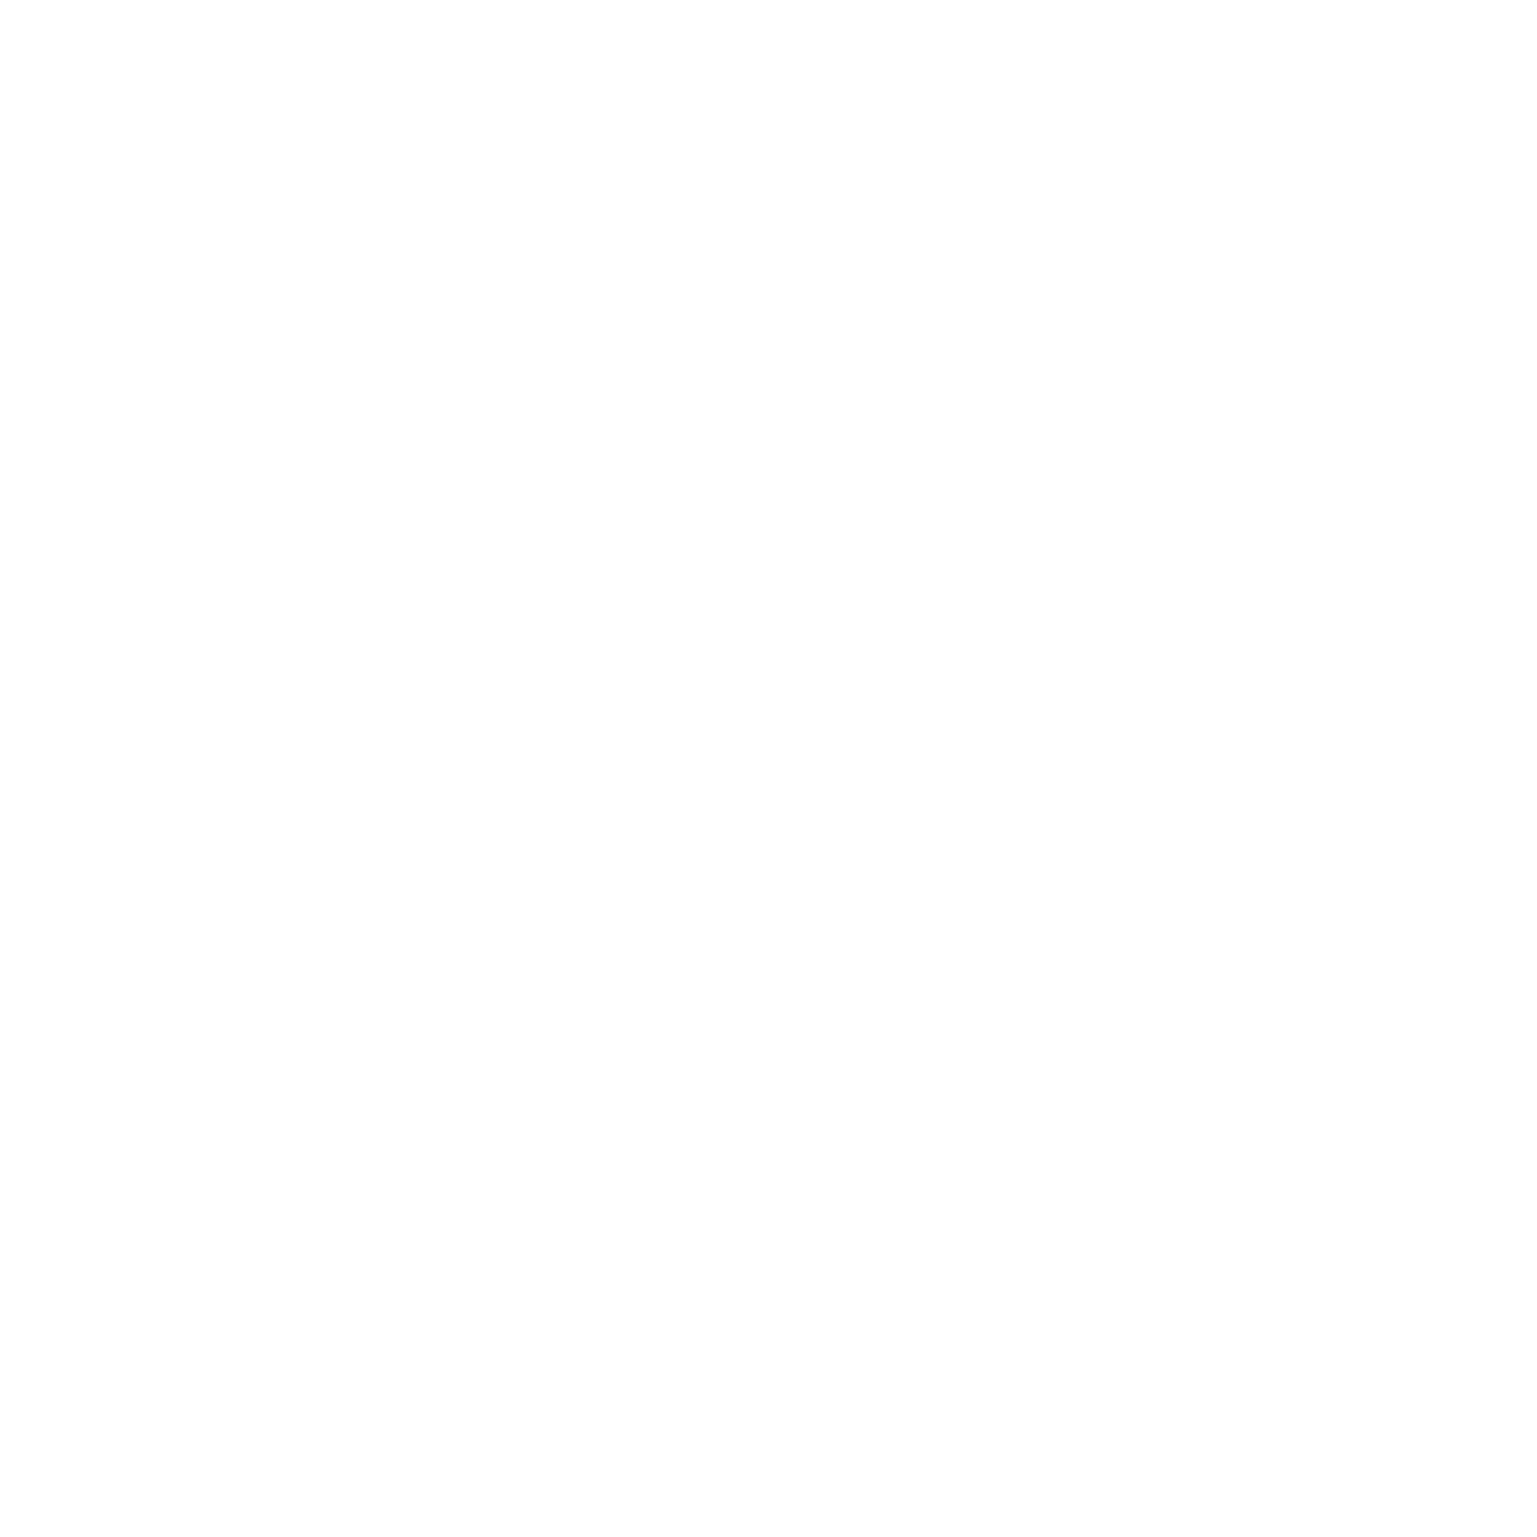 Dividends in 2022